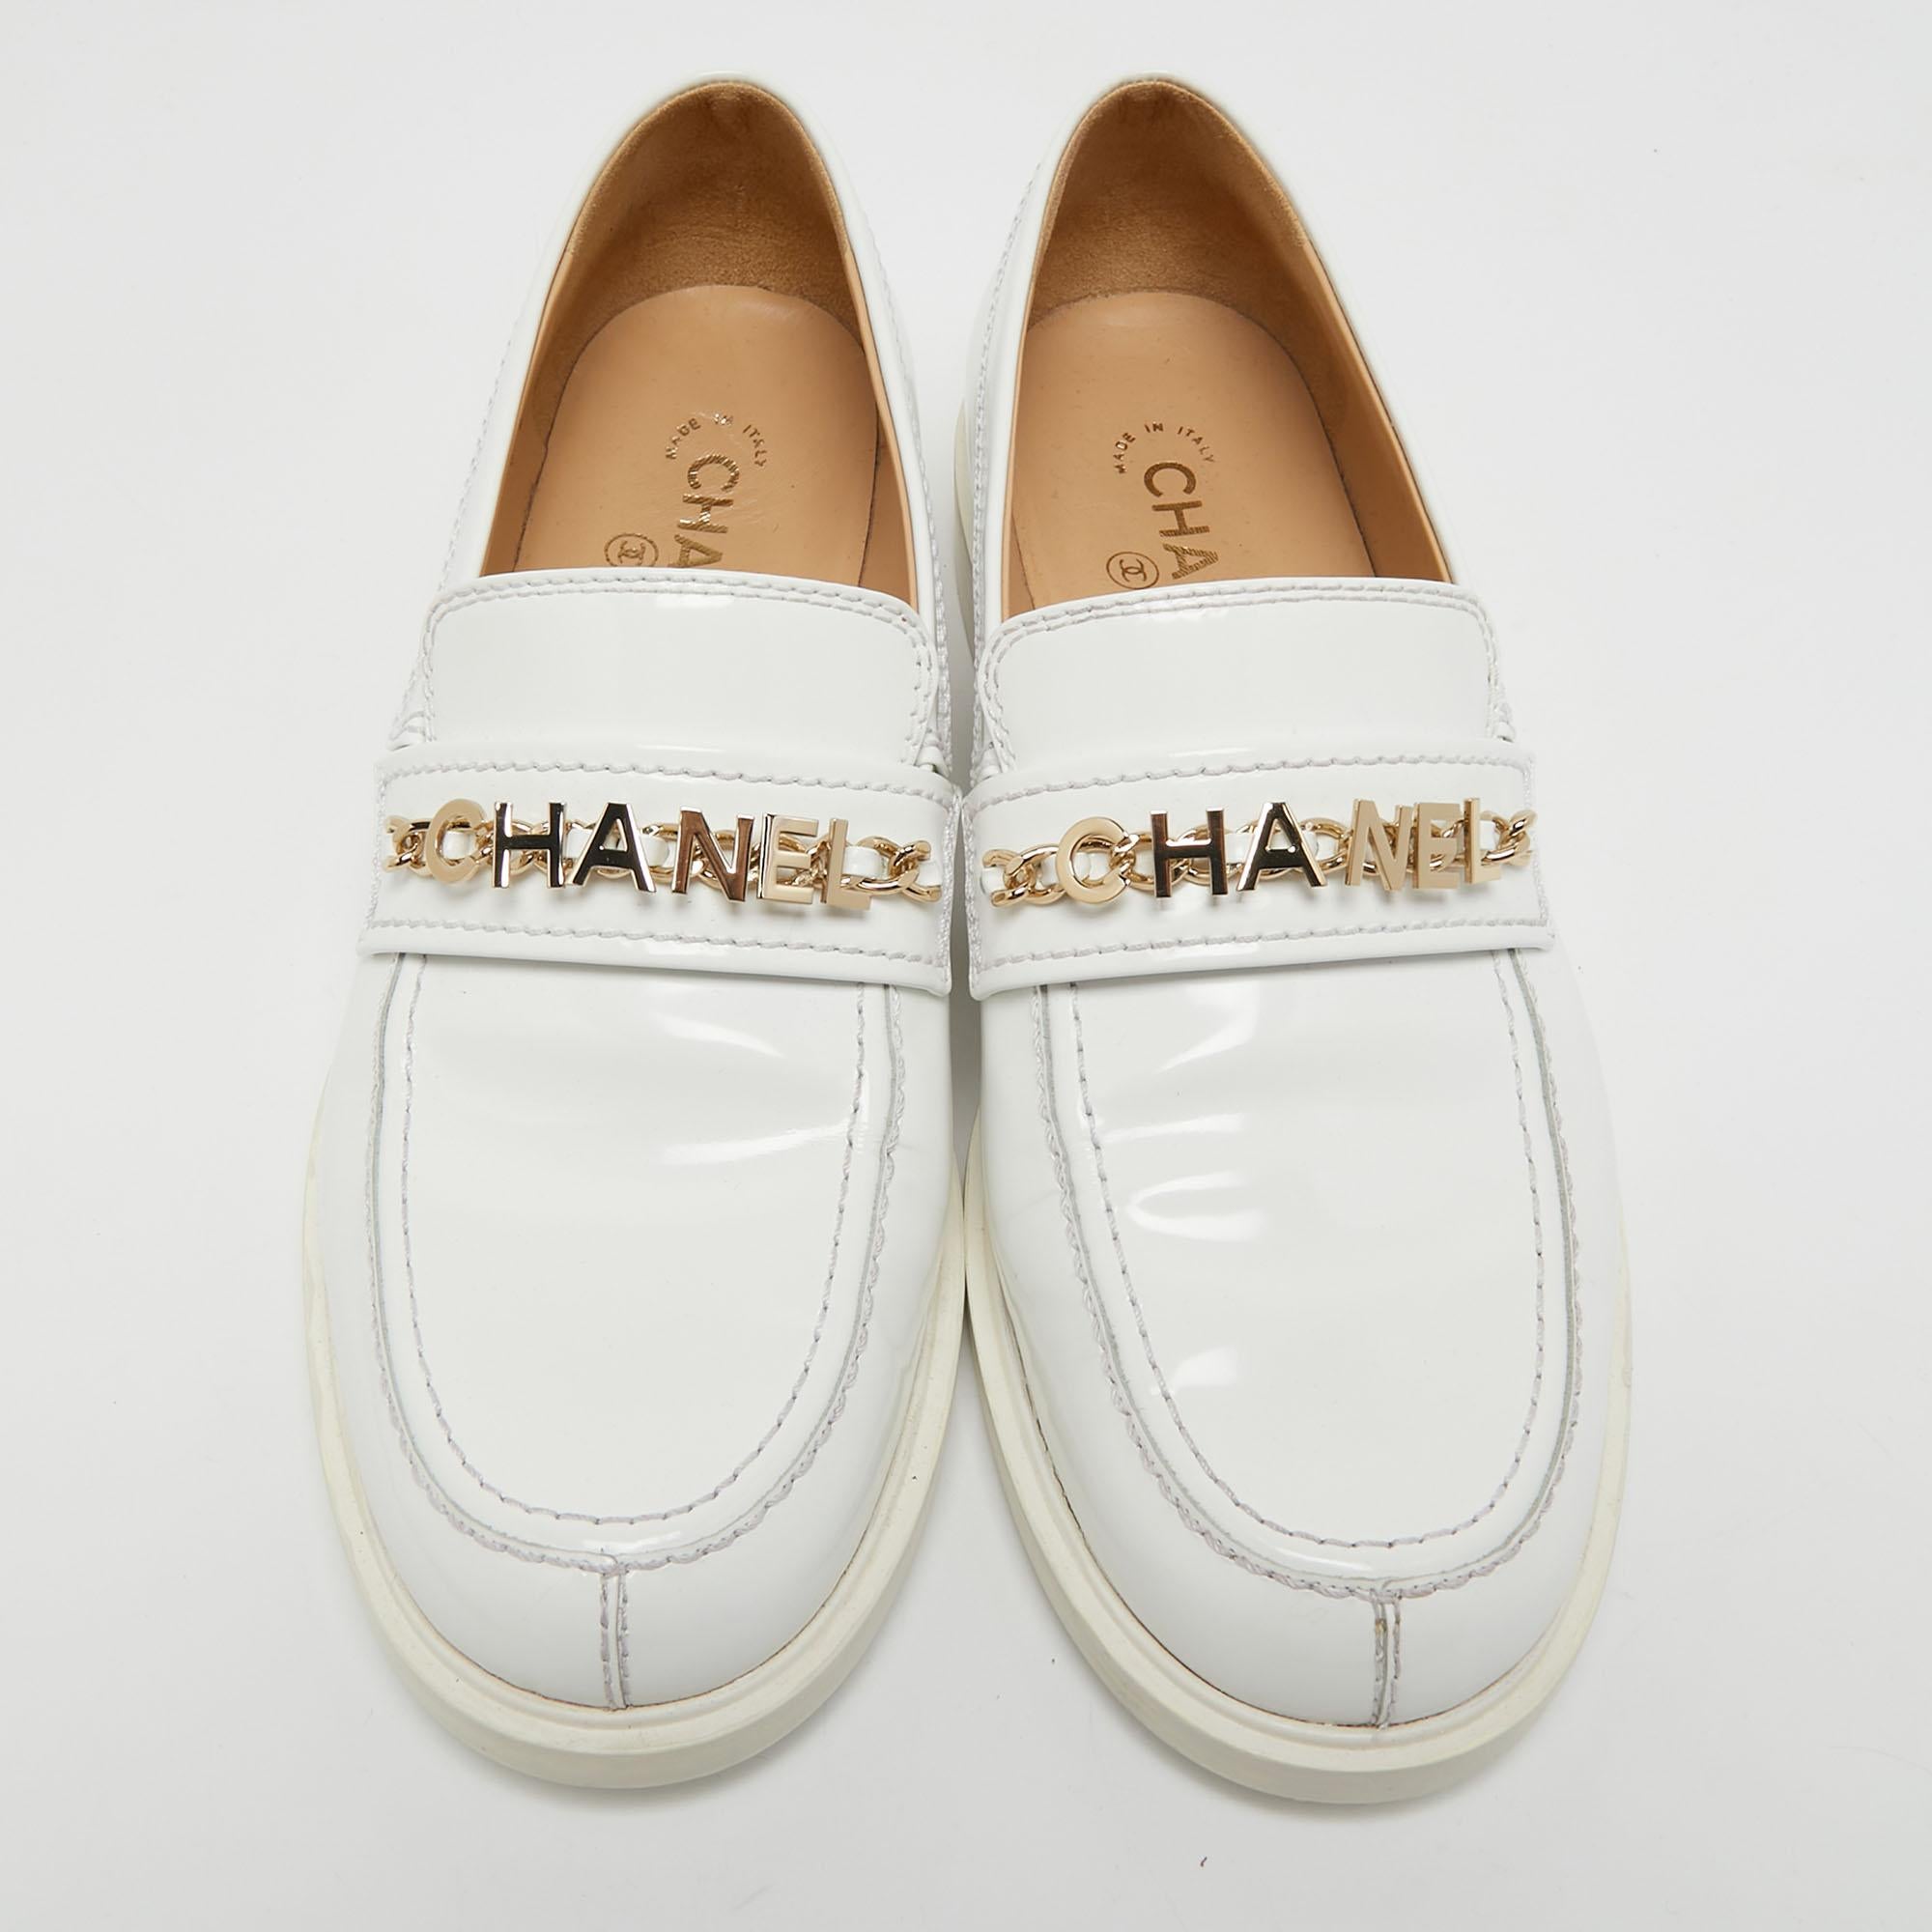 Chanel Shoes Size 42 - 5 For Sale on 1stDibs